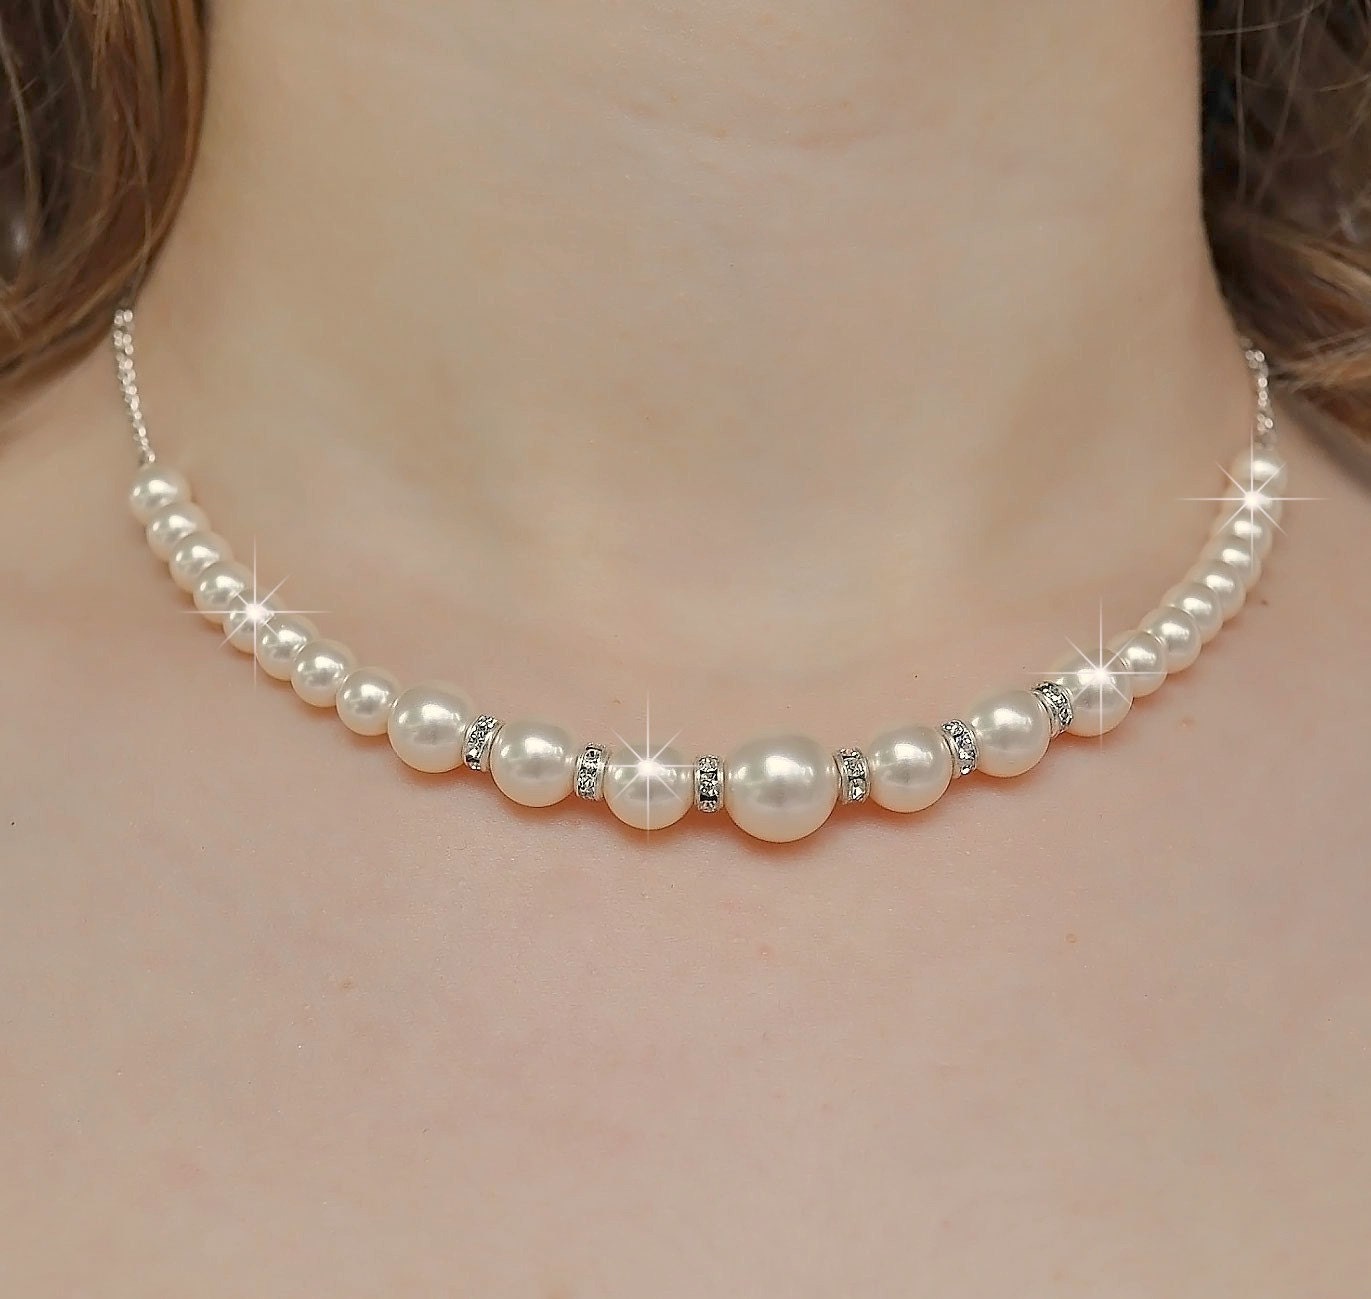 Bridal Necklace Rhinestone Pearl Necklace. Ivory Pearl